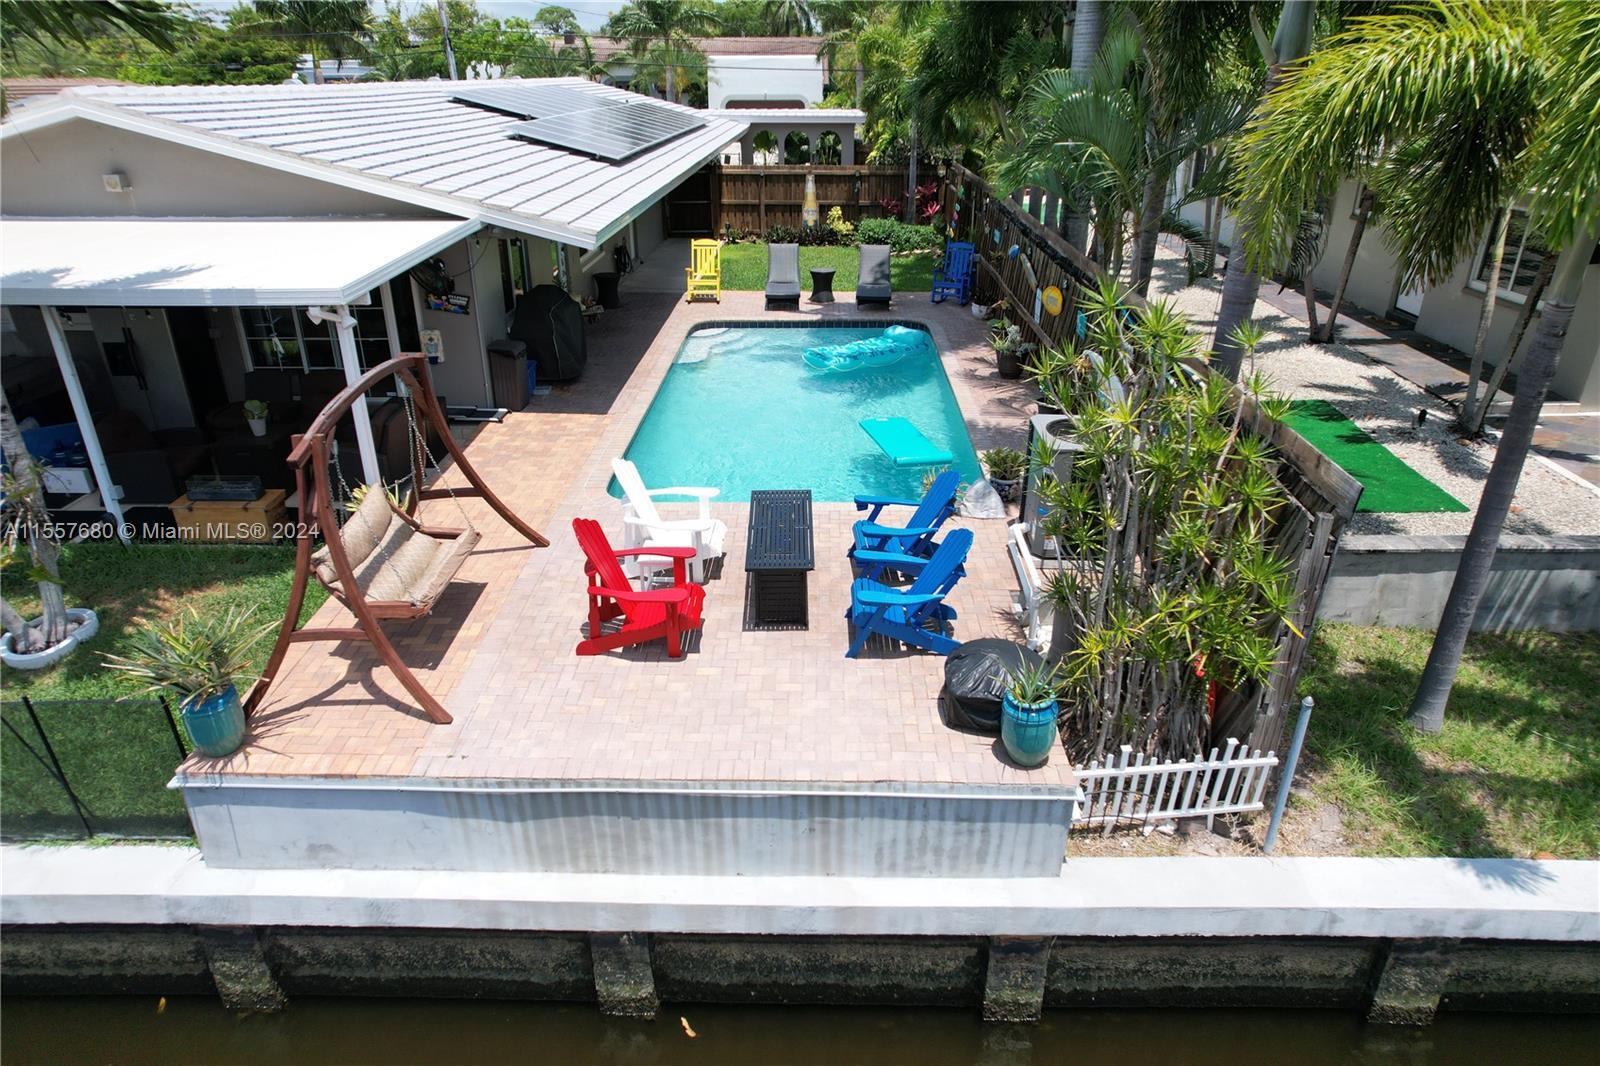 Waterfront three-unit AirBnB with lots of upside! This beautiful private oasis includes a heated sal